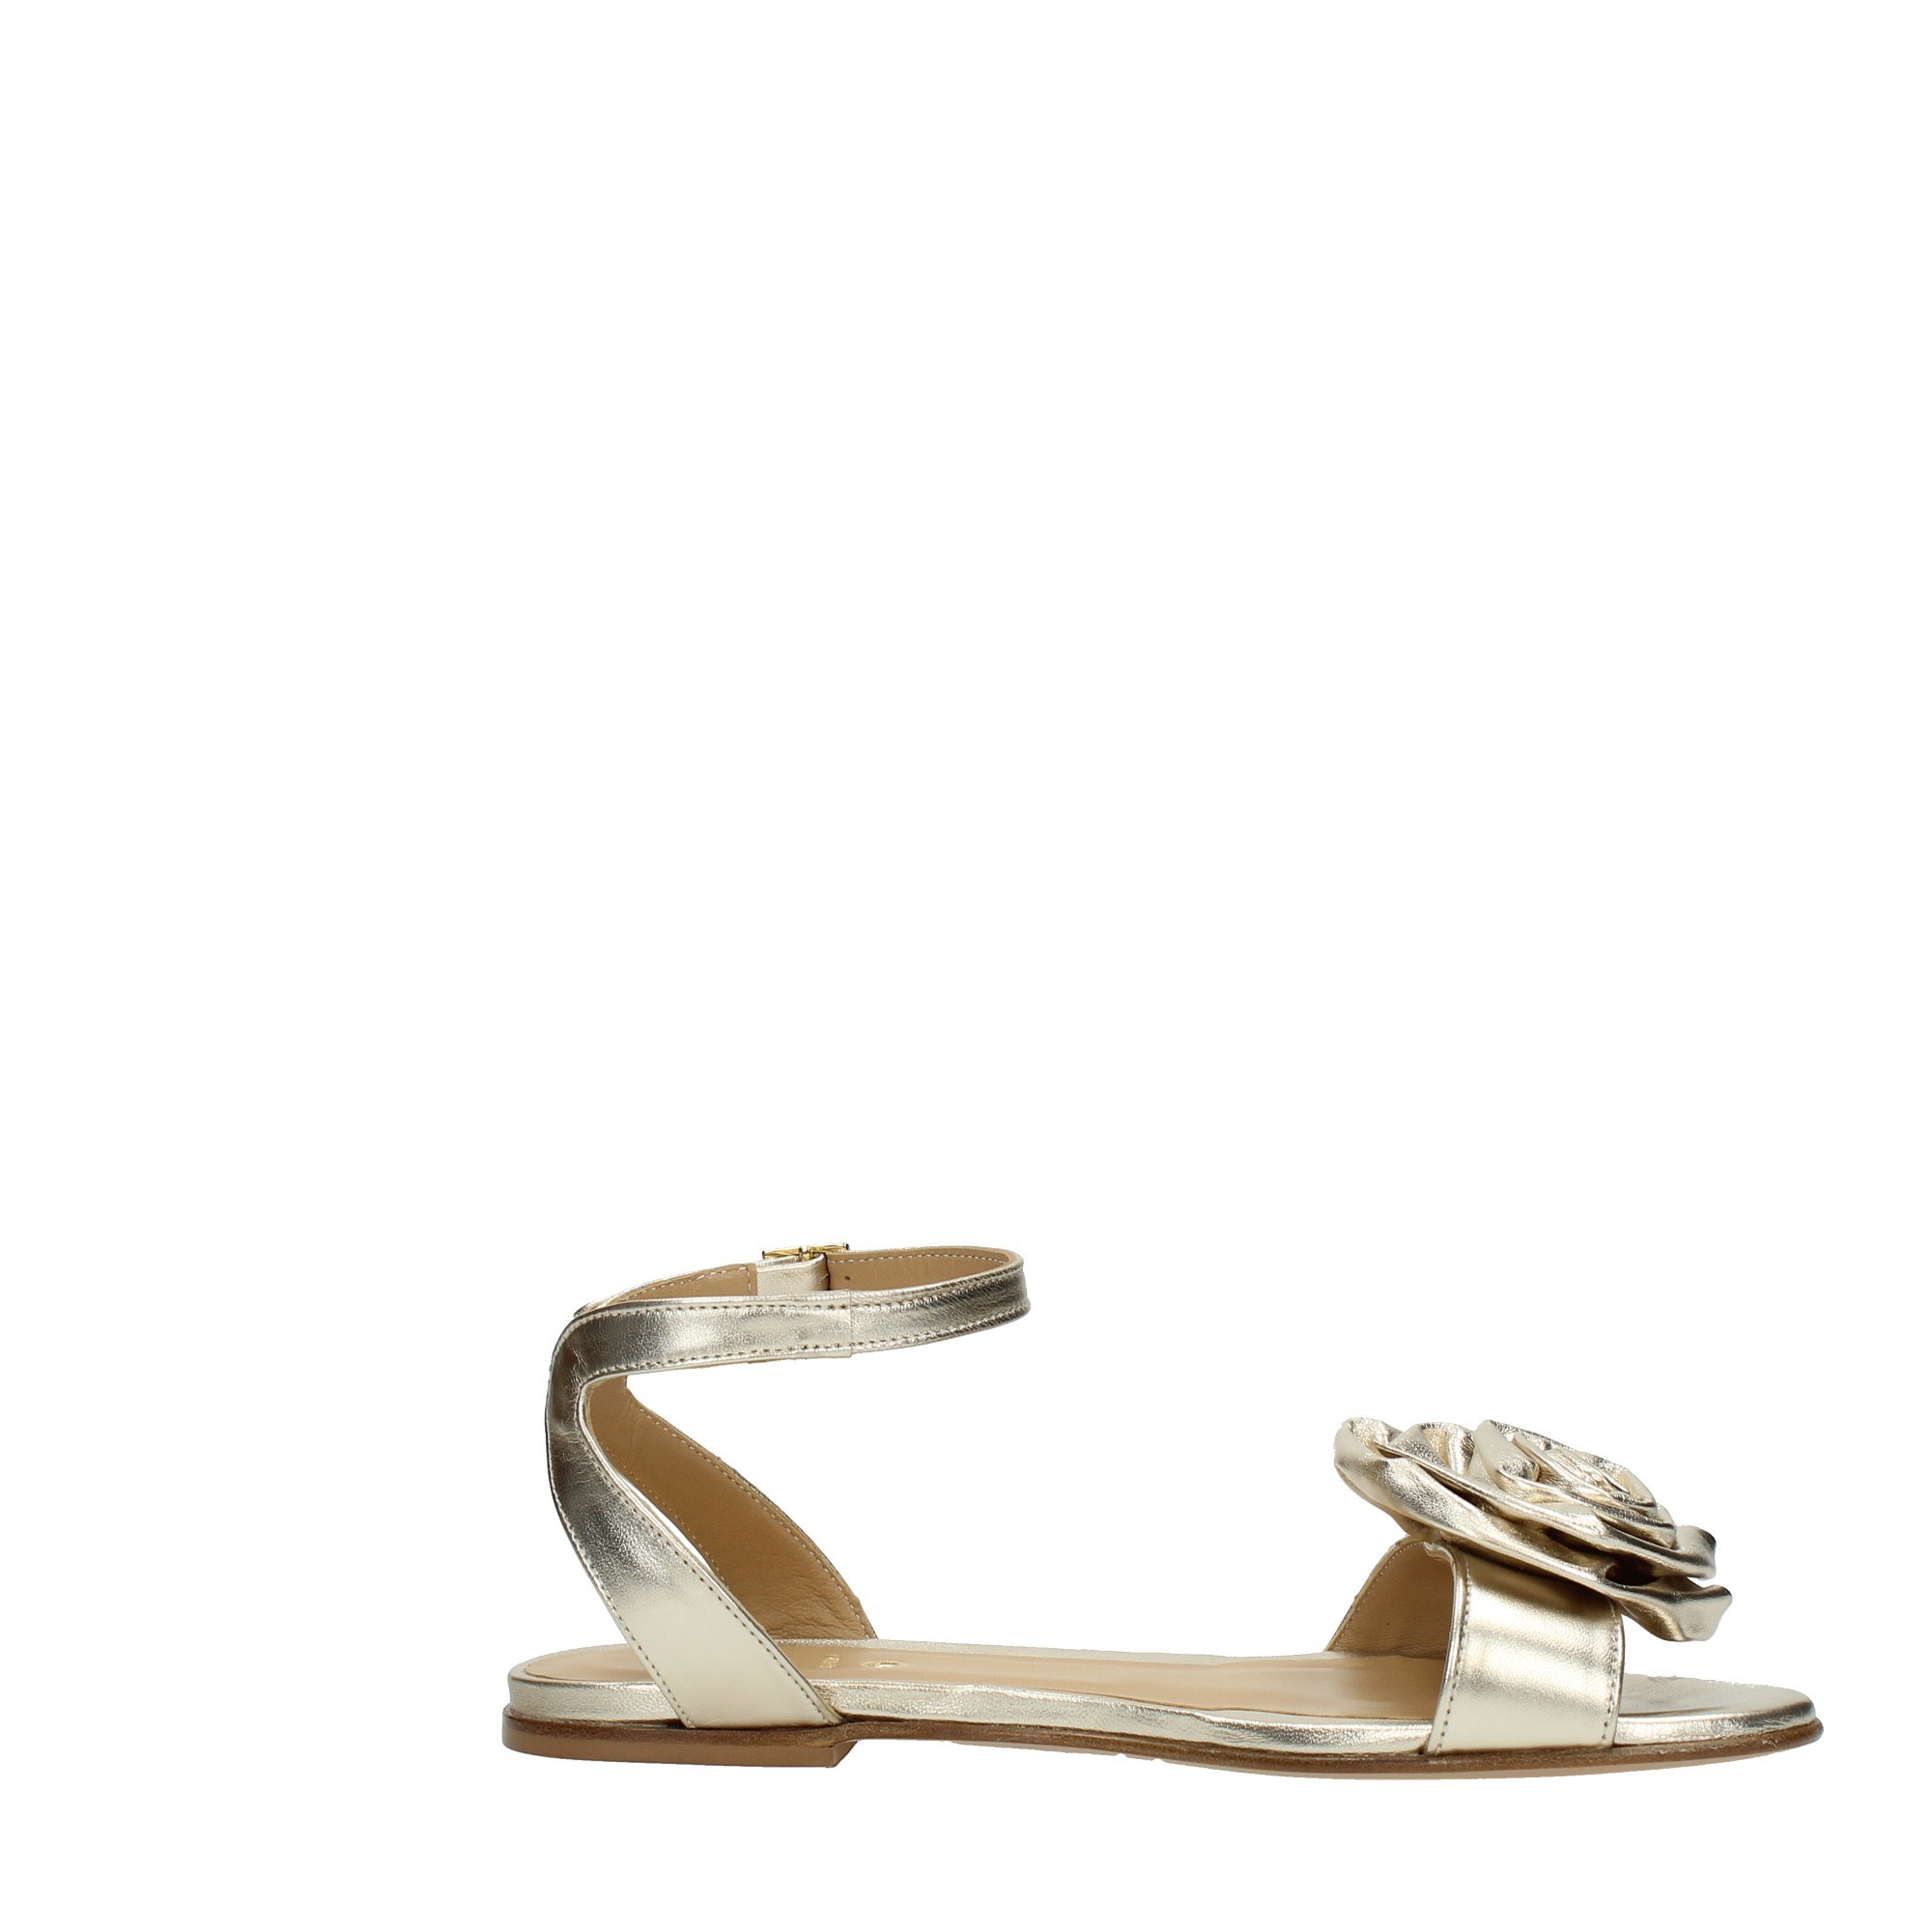 Wo Milano Shoes Women Sandals 812/ROSY